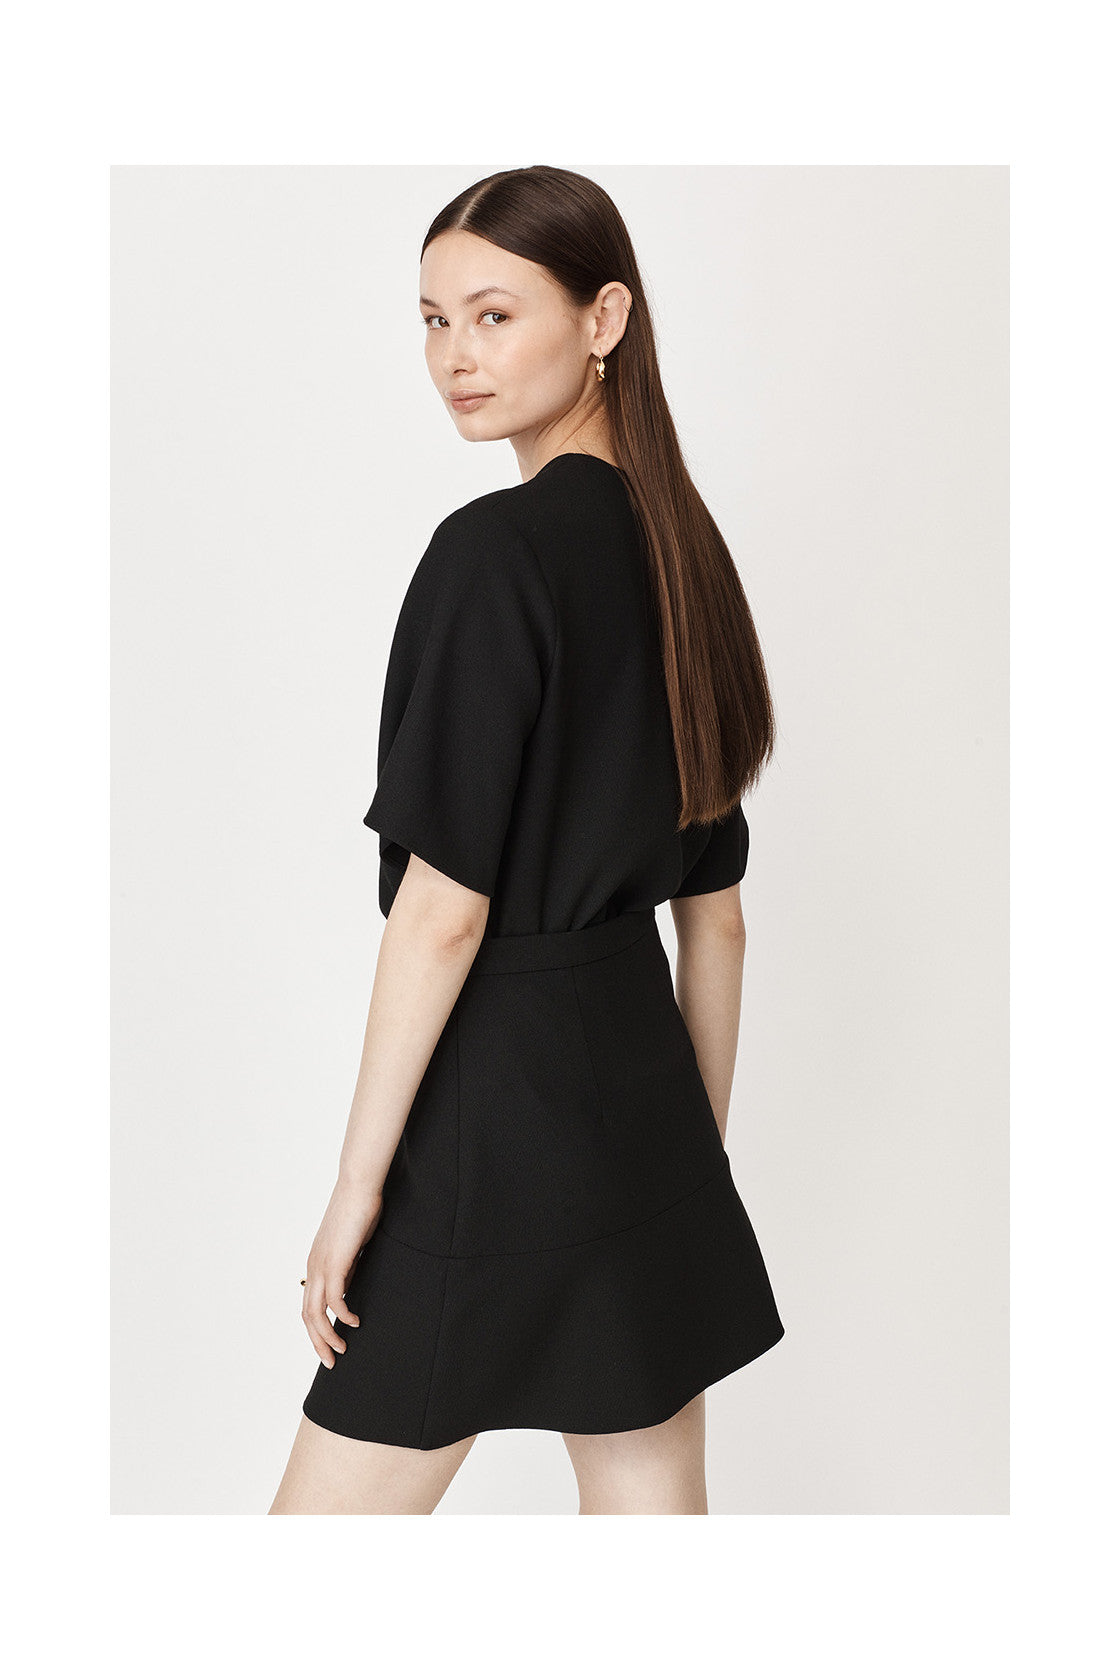 Black short skirt with fluted tier